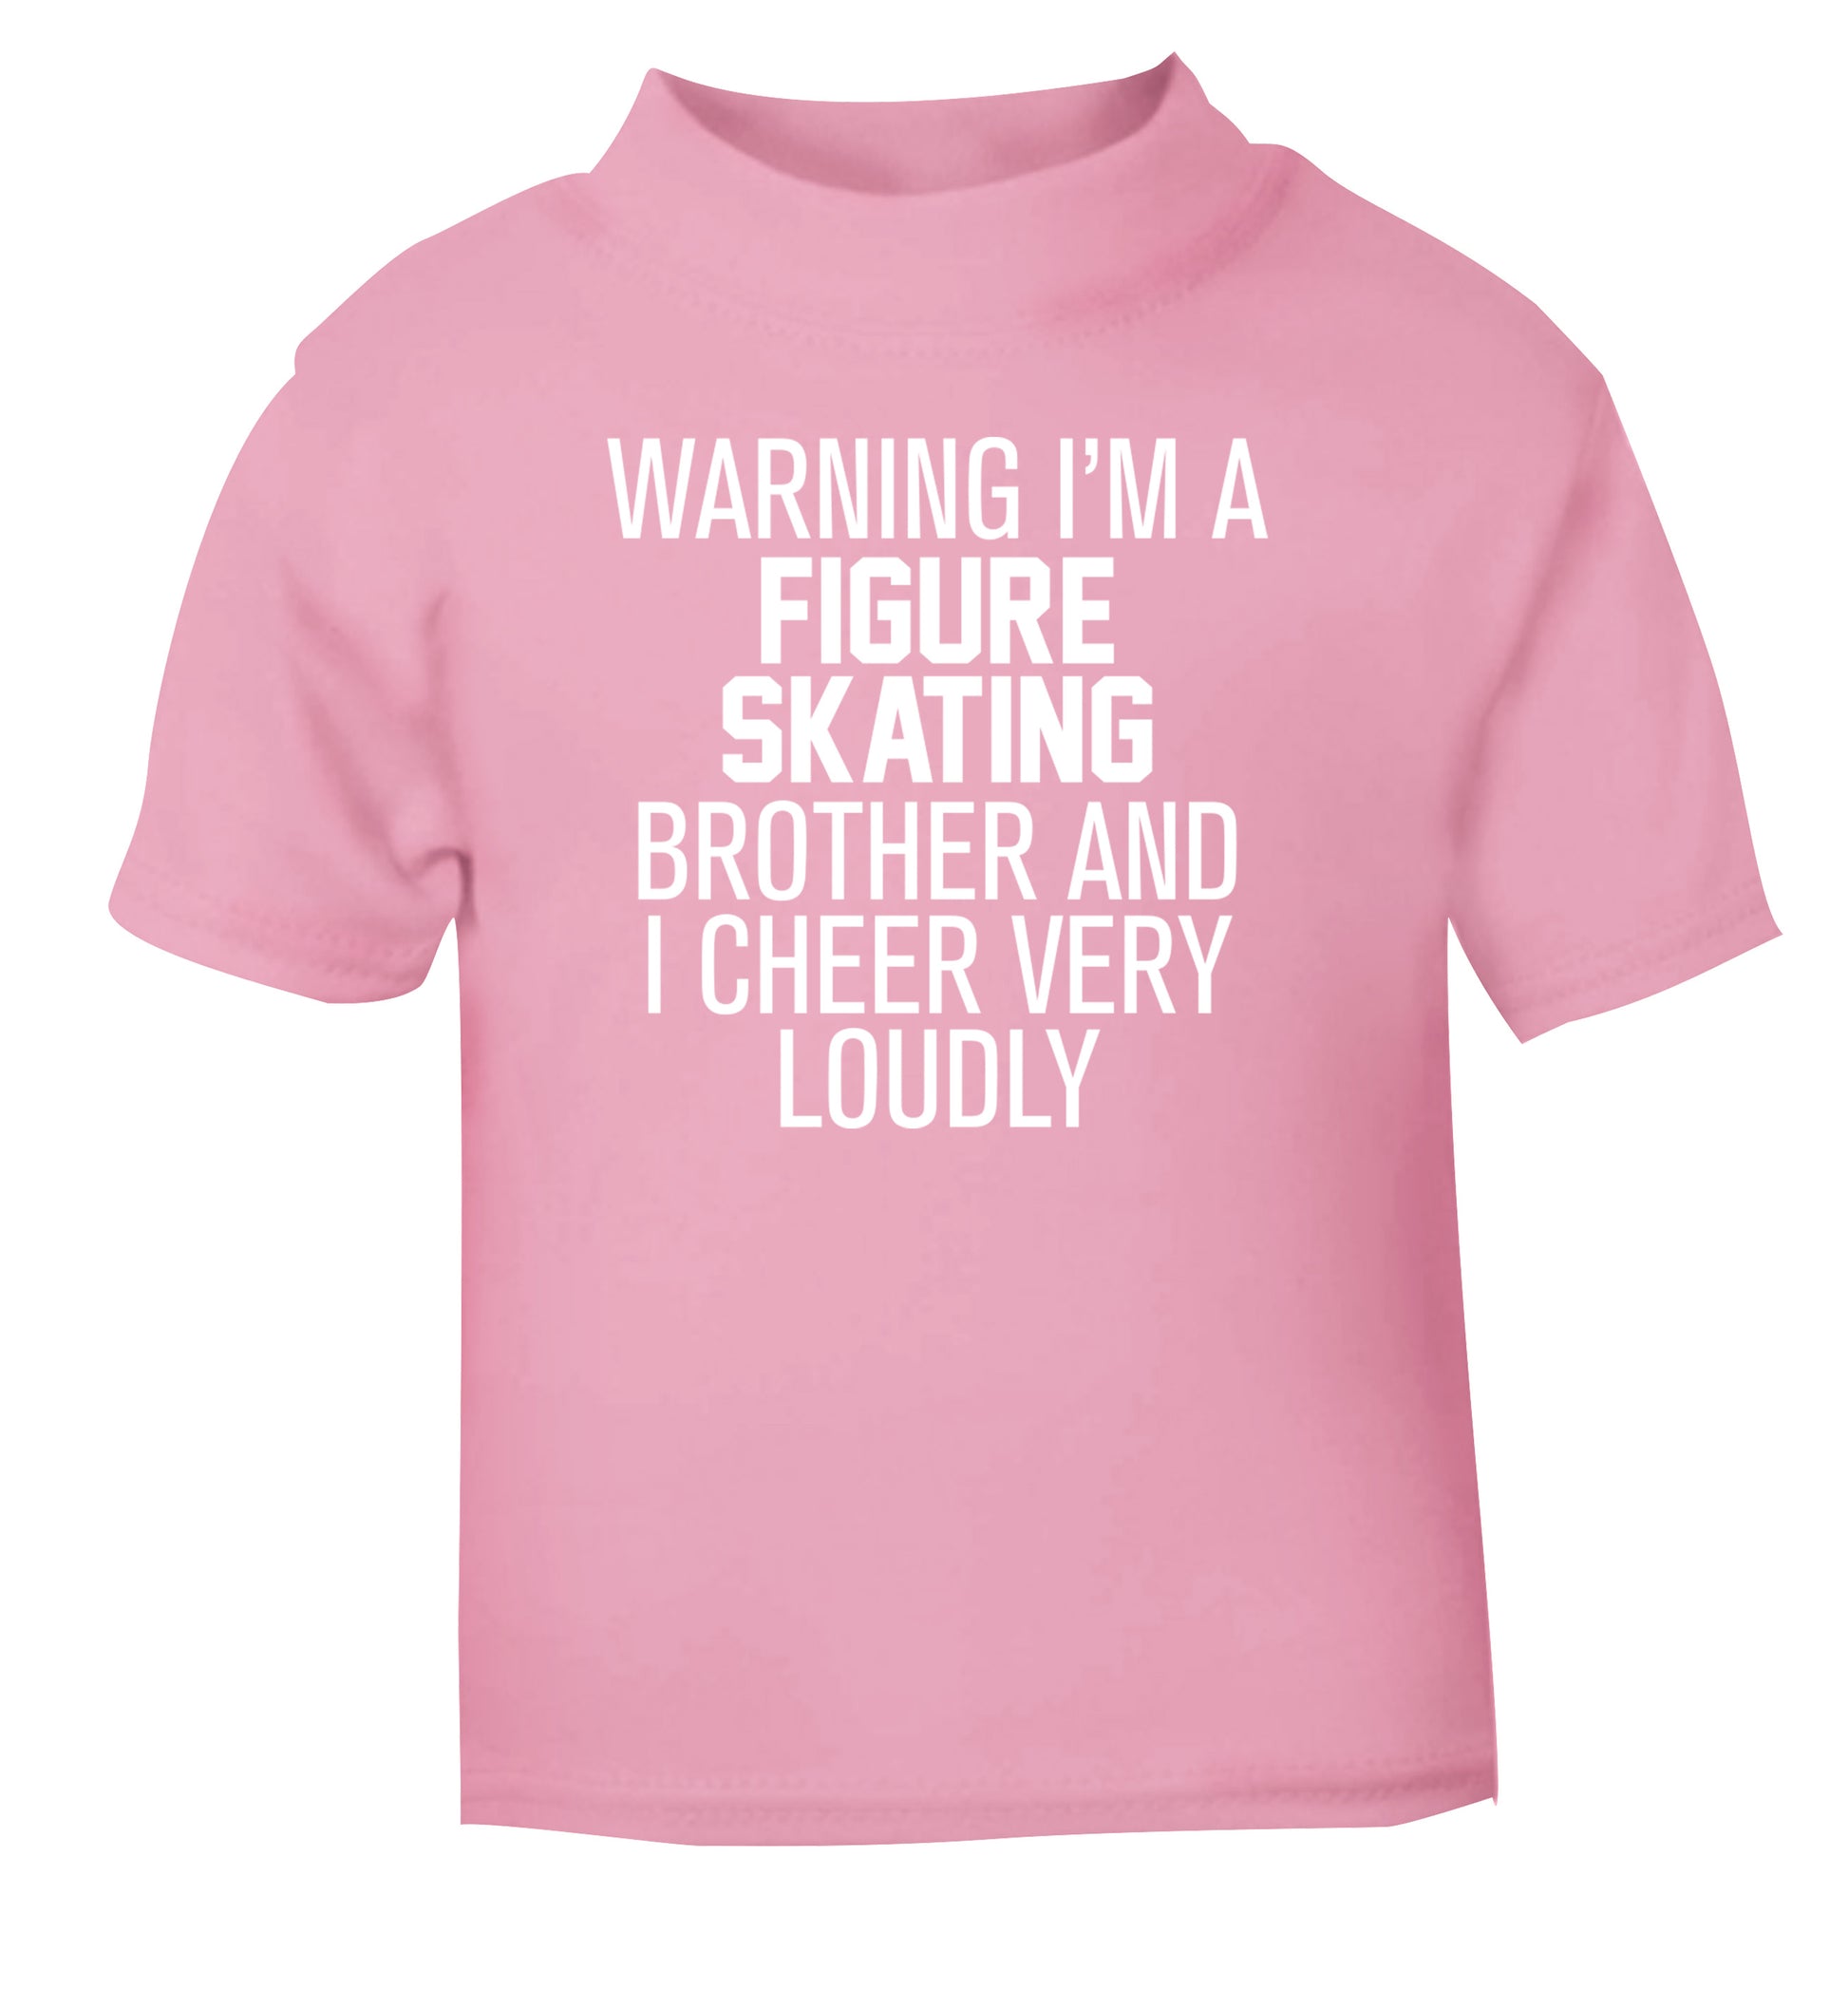 Warning I'm a figure skating brother and I cheer very loudly light pink Baby Toddler Tshirt 2 Years